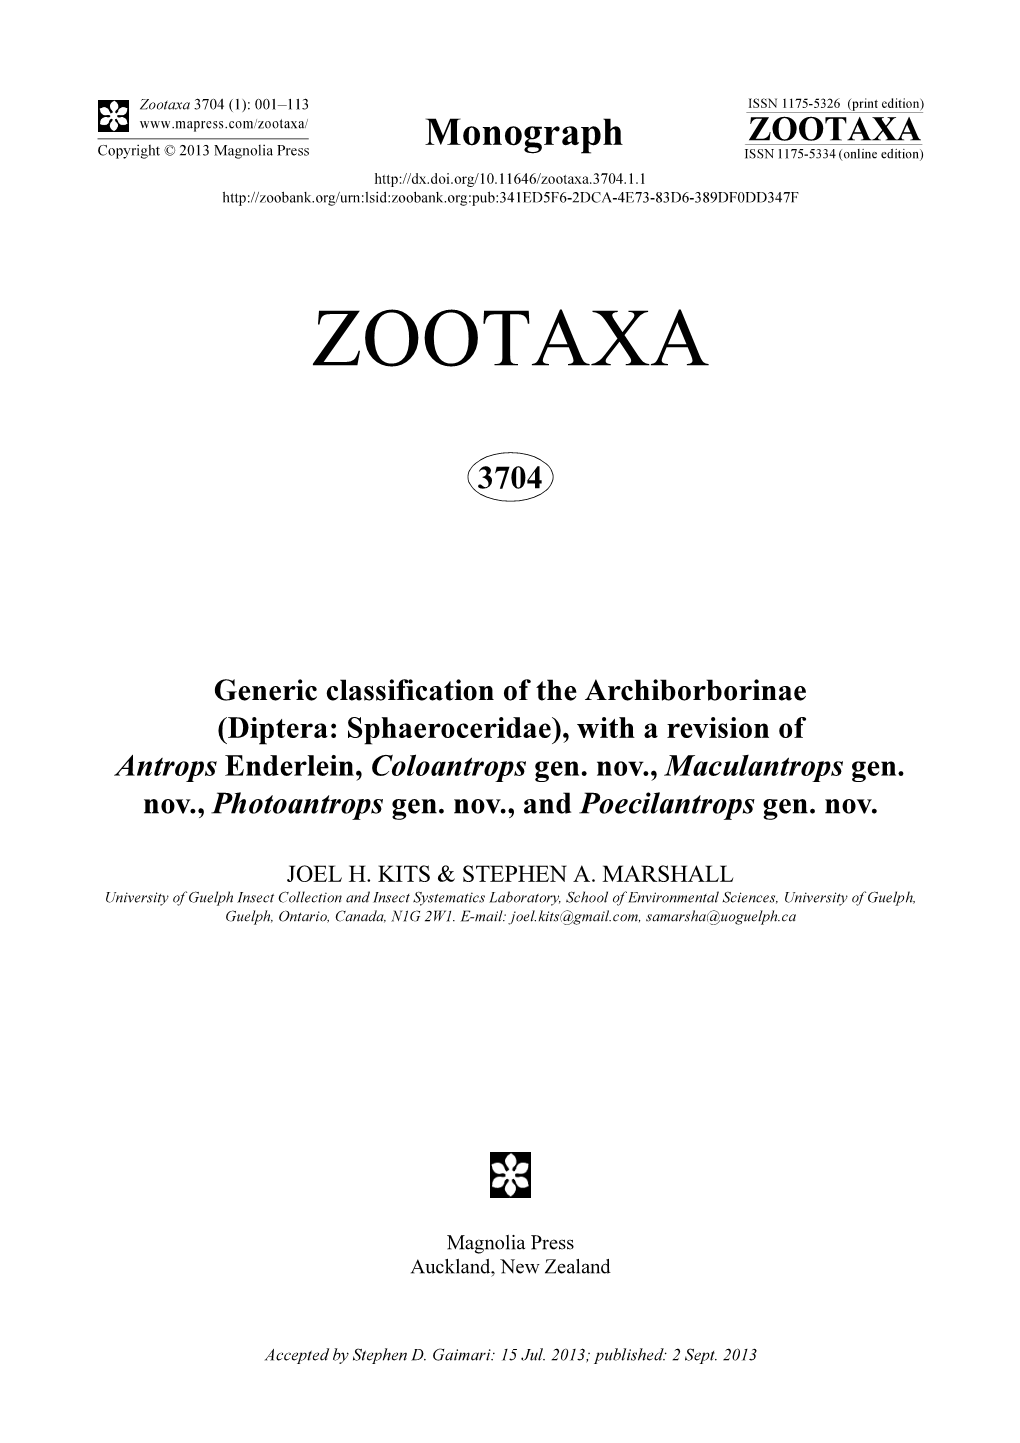 (Diptera: Sphaeroceridae), with a Revision of Antrops Enderlein, Coloantrops Gen